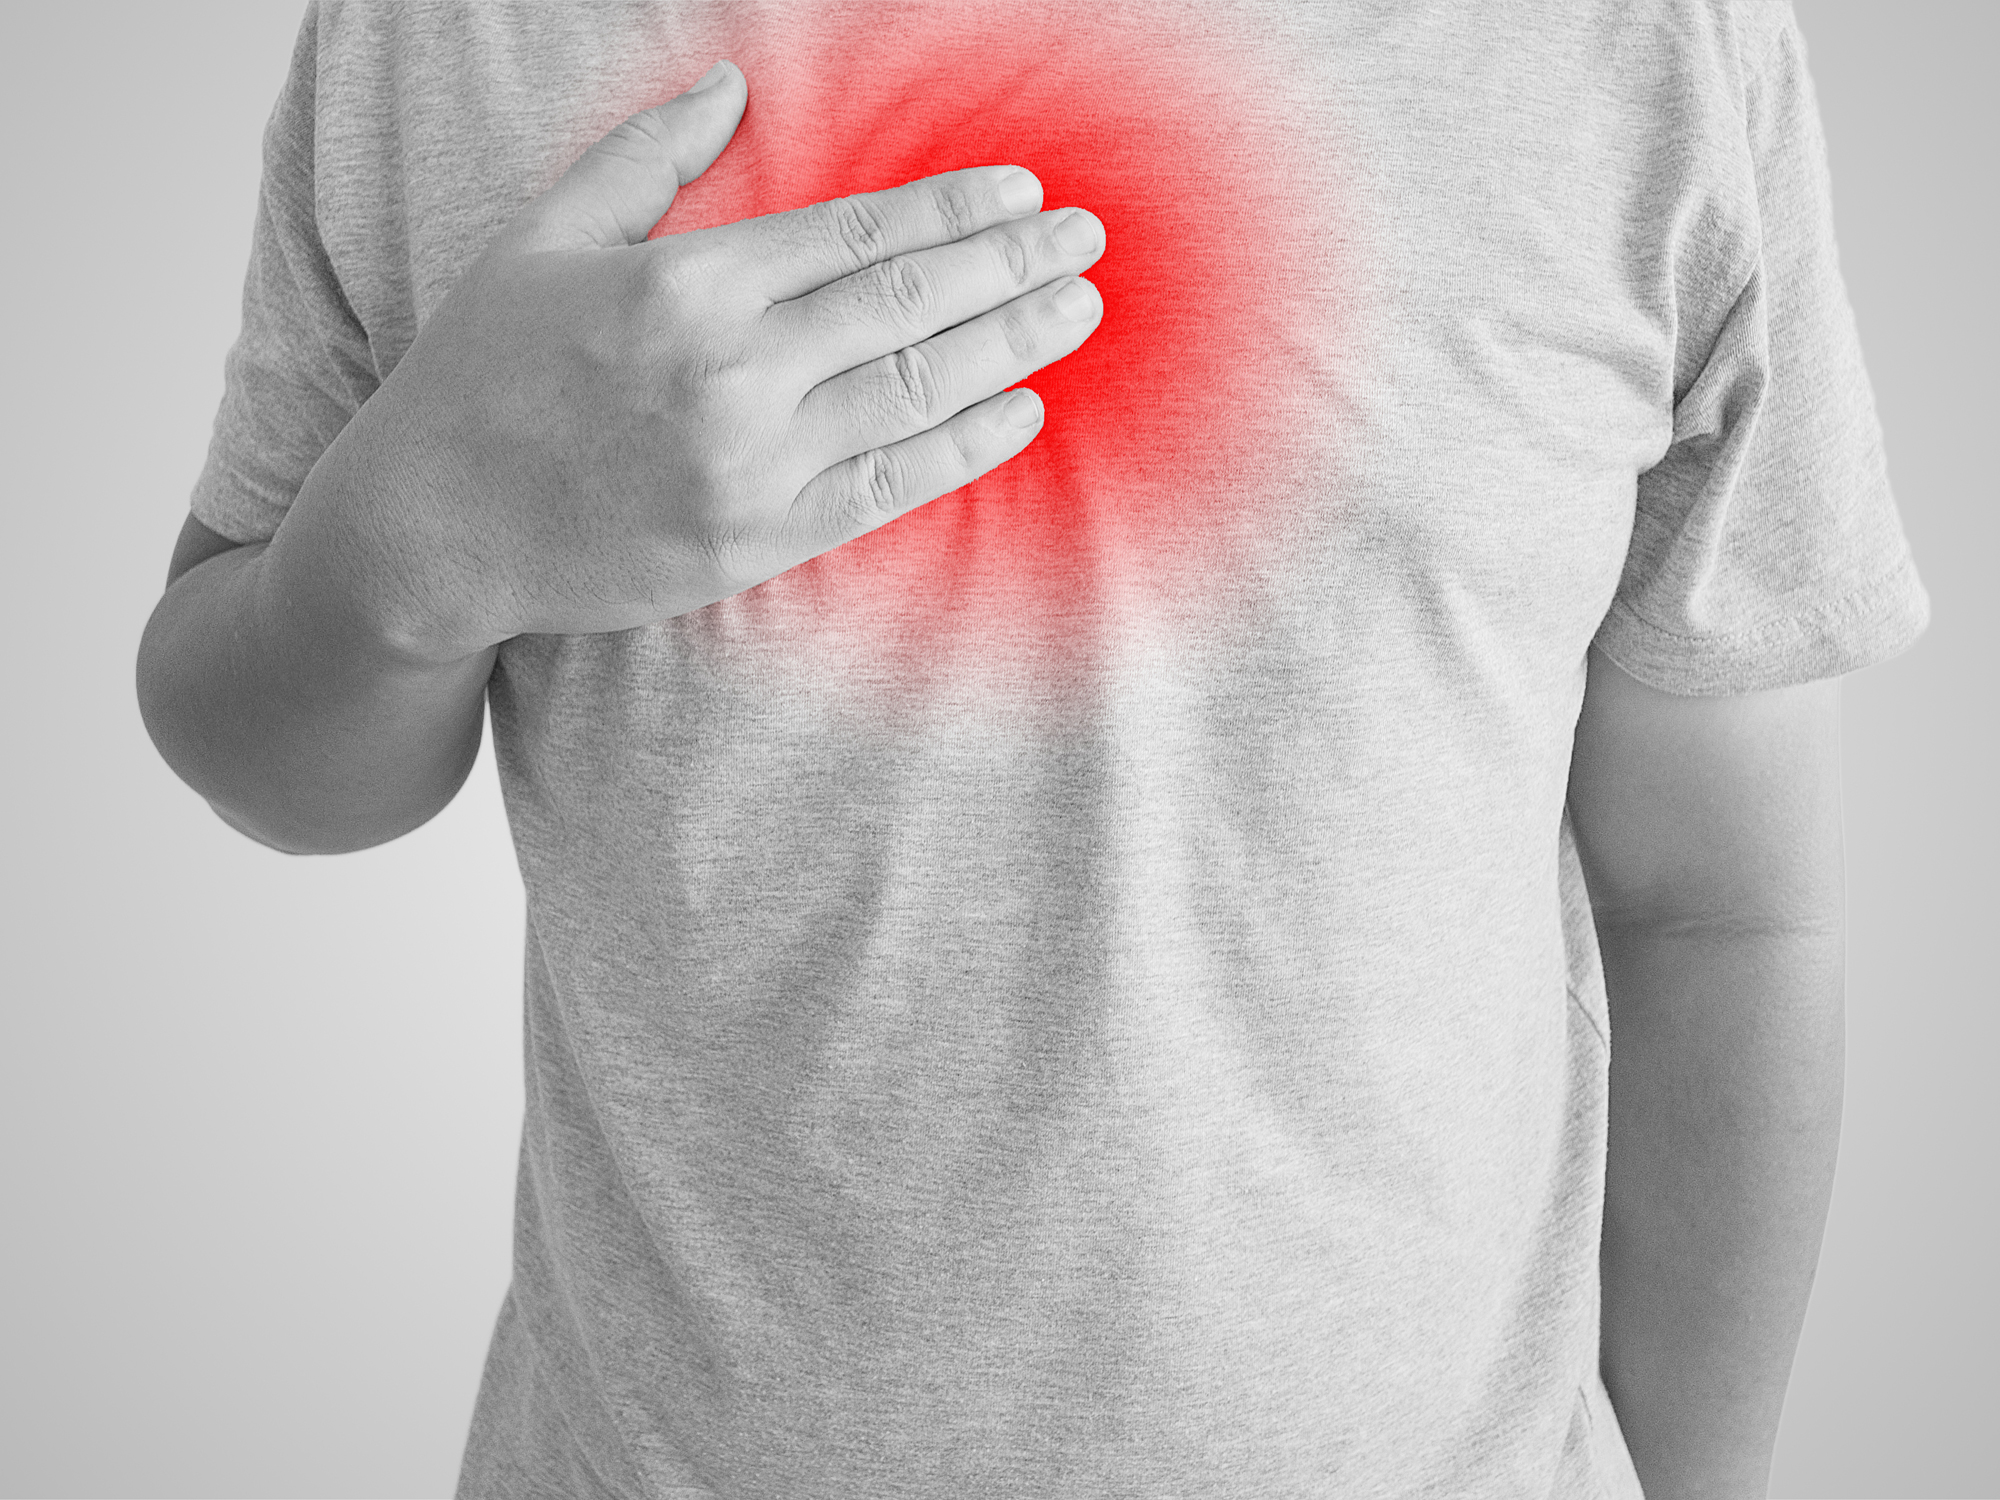 Heartburn relief that doesn’t harm your kidneys - Easy ...